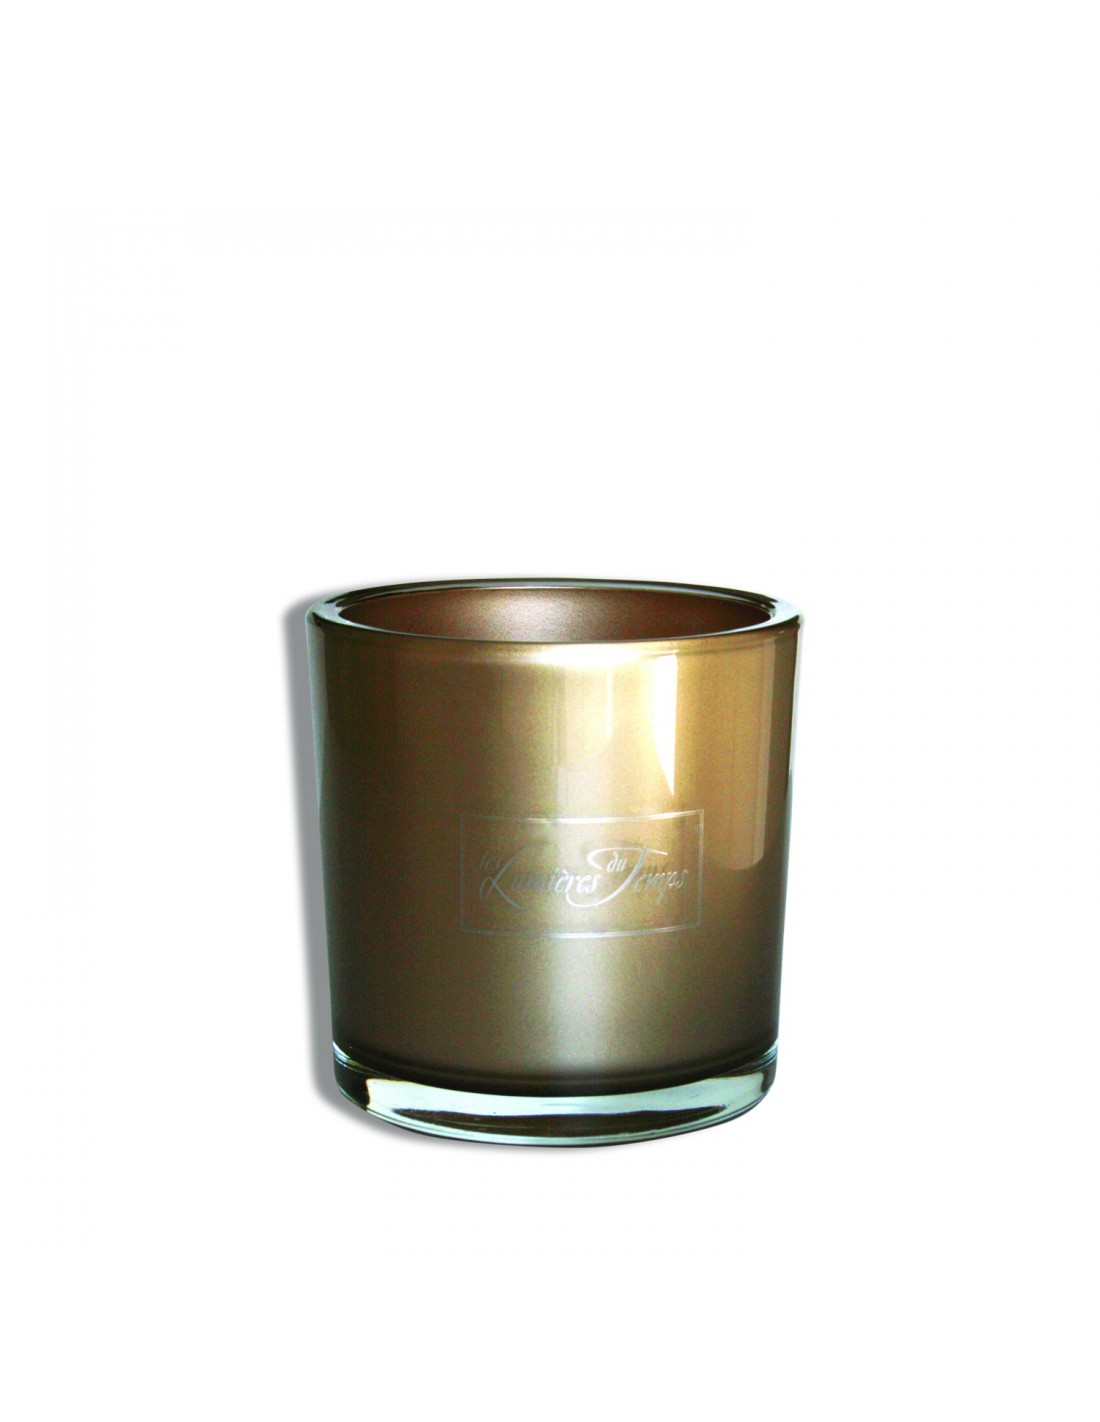 Bougie Luxe 920 gr poudre d'or